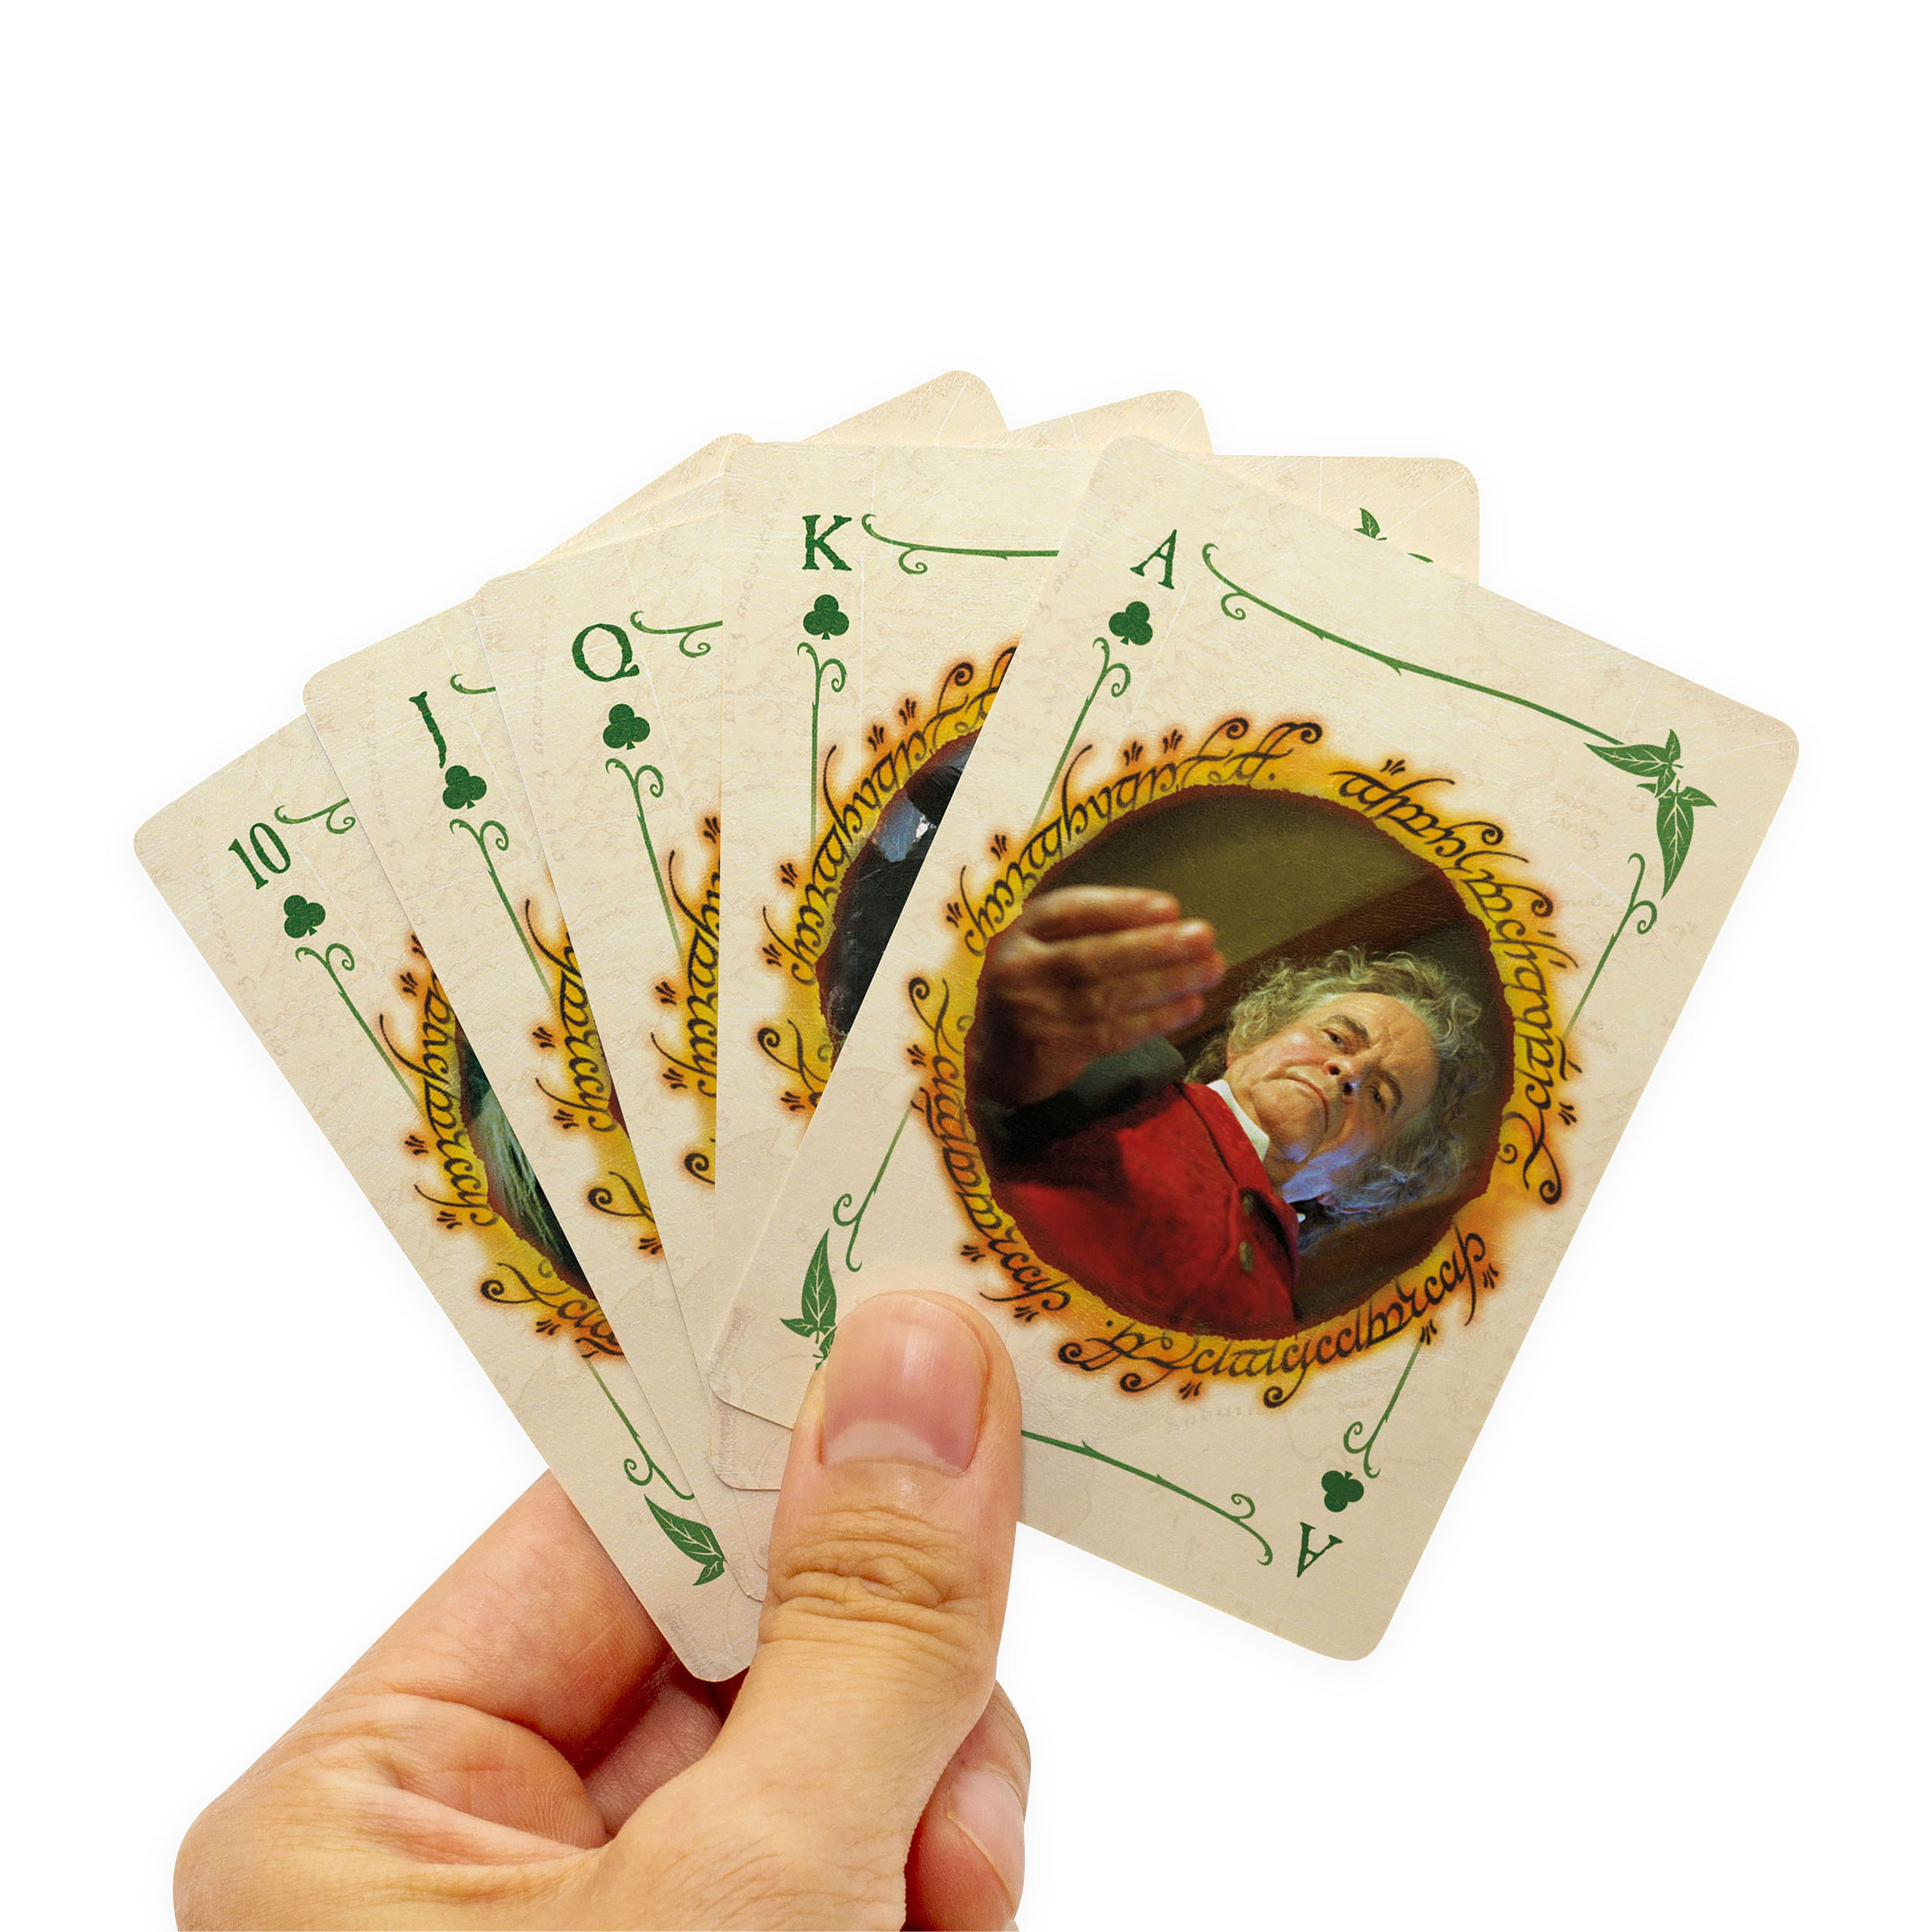 Lord of the Rings - The Fellowship of the Ring Playing Cards